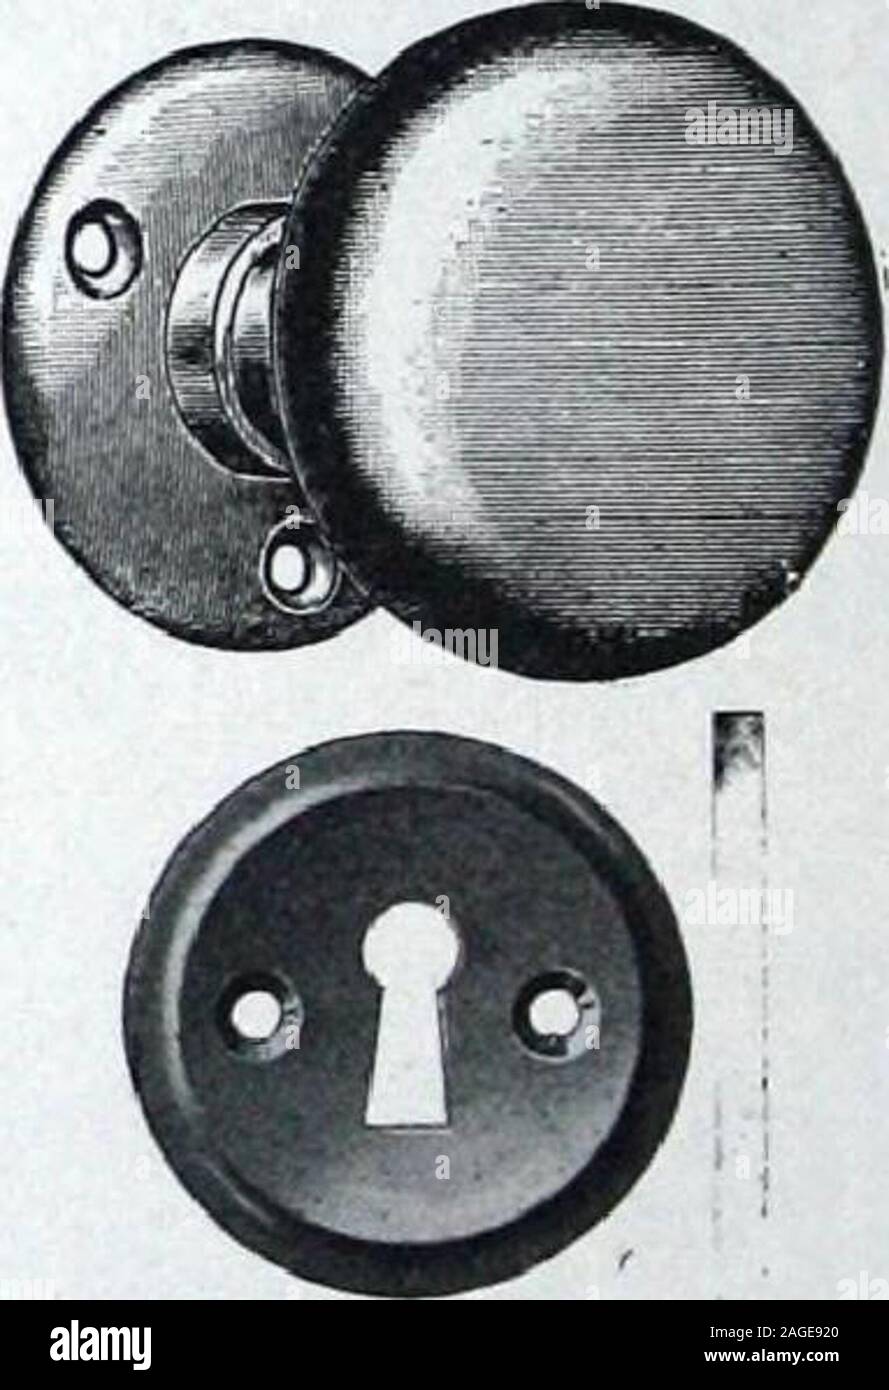 . Illustrated Catalogue of Locks and Builders Hardware. No. A8676. No. A8624. No. A8625. No, A8676—Lock No. 806. Knobs No. A8544. Roses Cast. Key Plates No, 8915.No. A8624—Lock No. 806. Knobs No. A8544. Roses Cast. Key Plates No. 8900.No. A8625—Lock No. 808. Knobs No. A8544. Roses Cast. Key Plates. No. 8907. Screwiess Spindles furnished on any of above Sets when required, at additional cost. (One Half Size Illustrations). I ? 234 215 The Springer Logic Manufacturing Company, Limited INSIDE LOCK SETS KNOBS AND KEY PLATESSolid Bronze Stock Photo